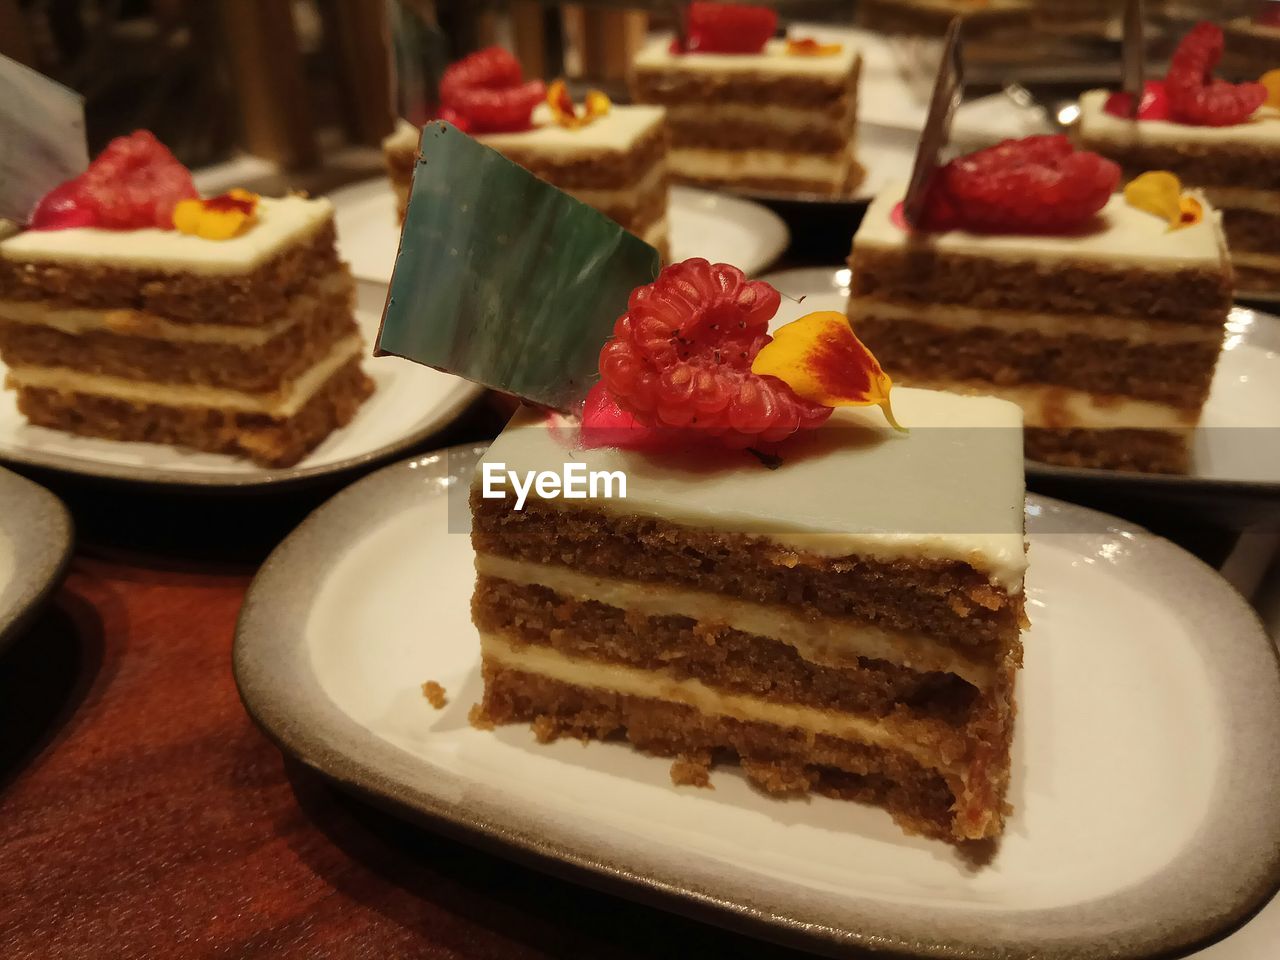 CLOSE-UP OF CAKE ON TABLE